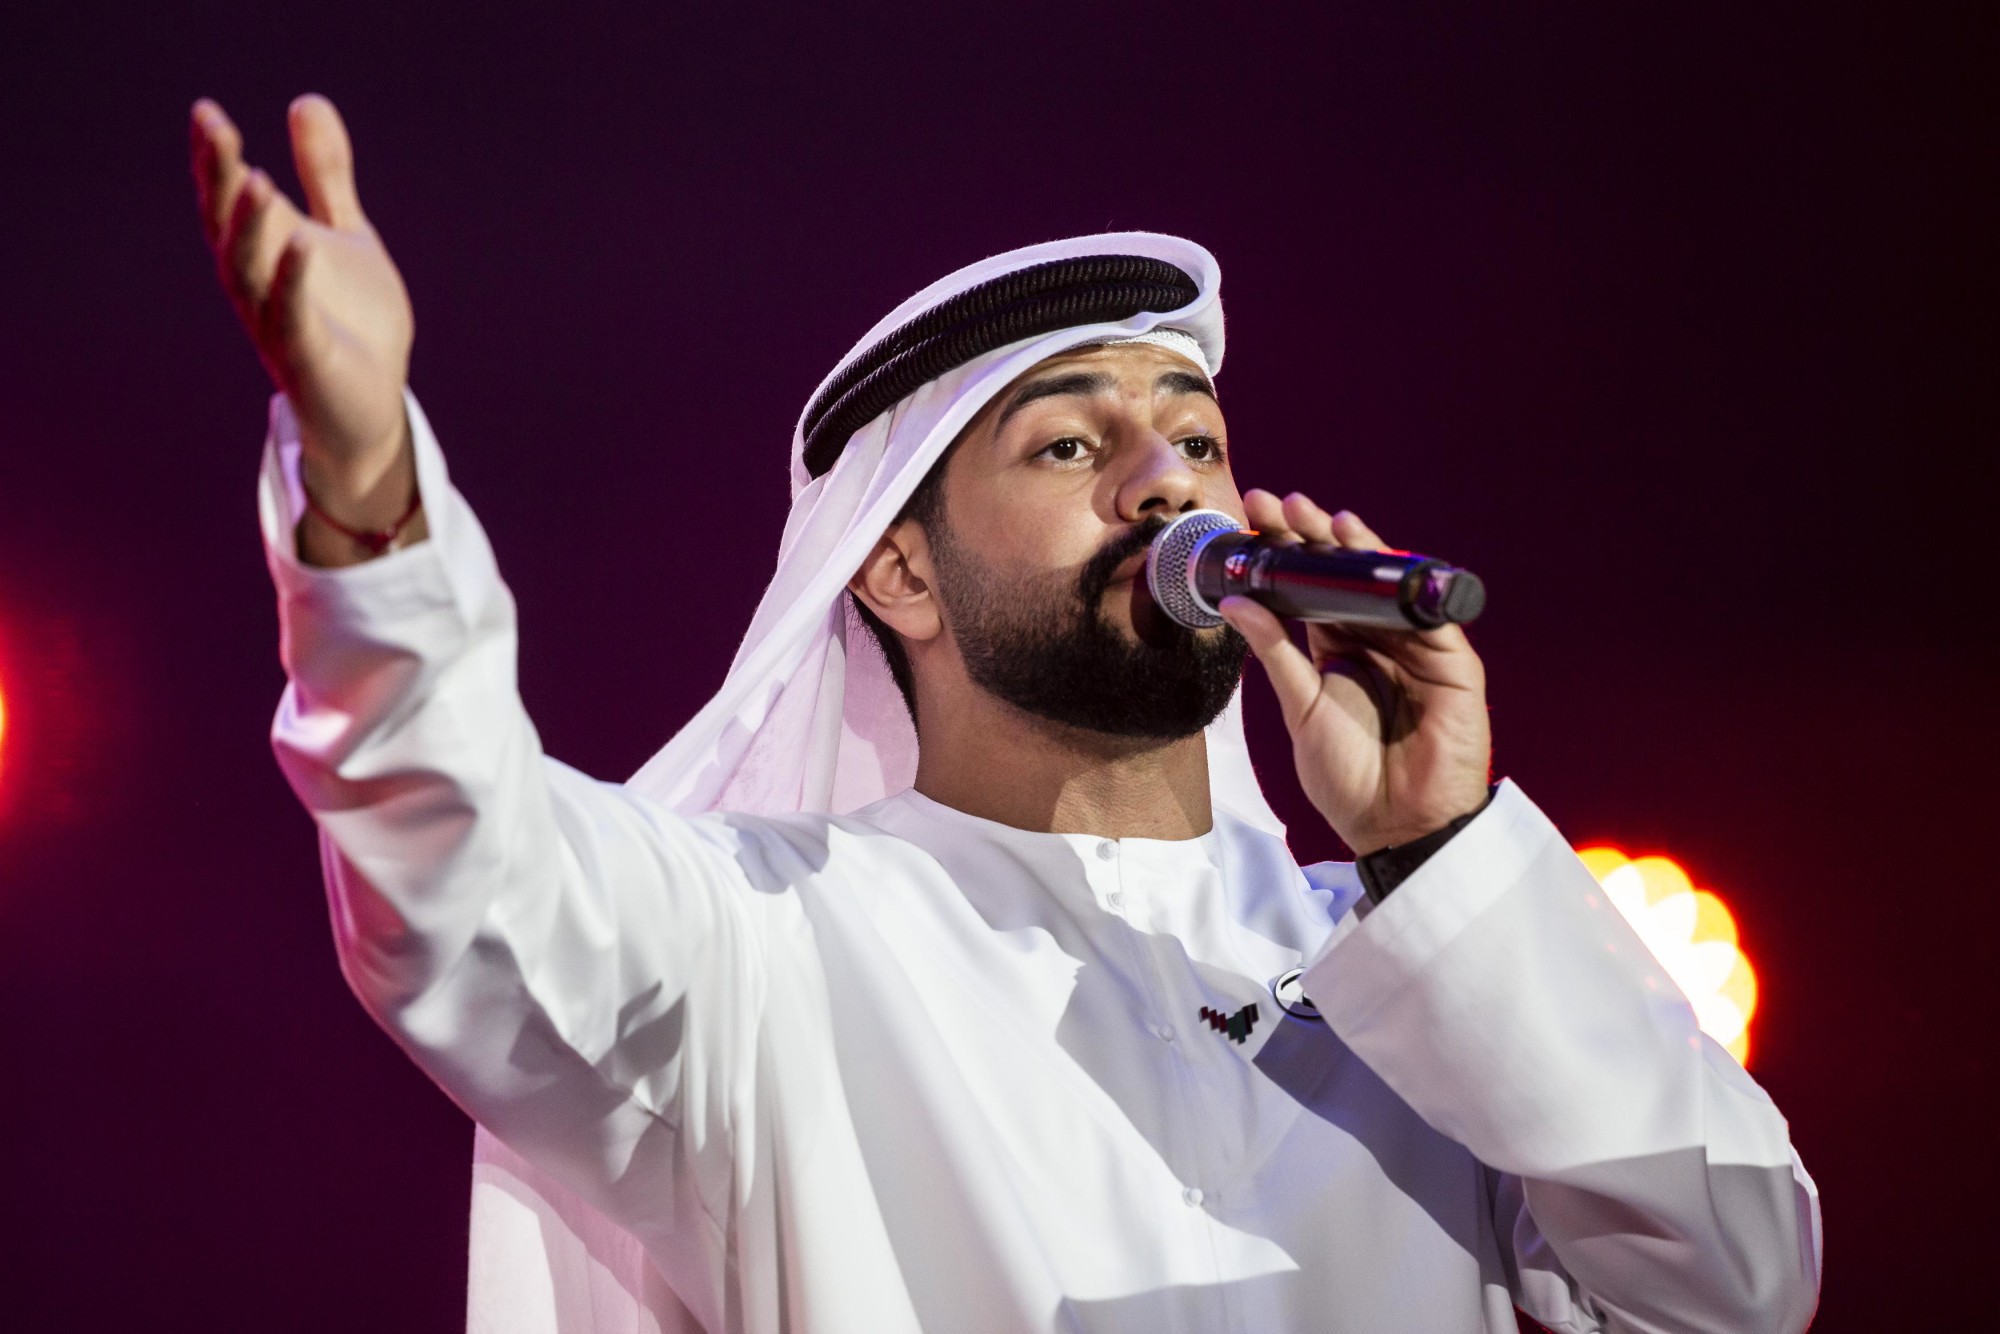 Mohamed Al-Shehhi performs at Jubilee Stage m16450